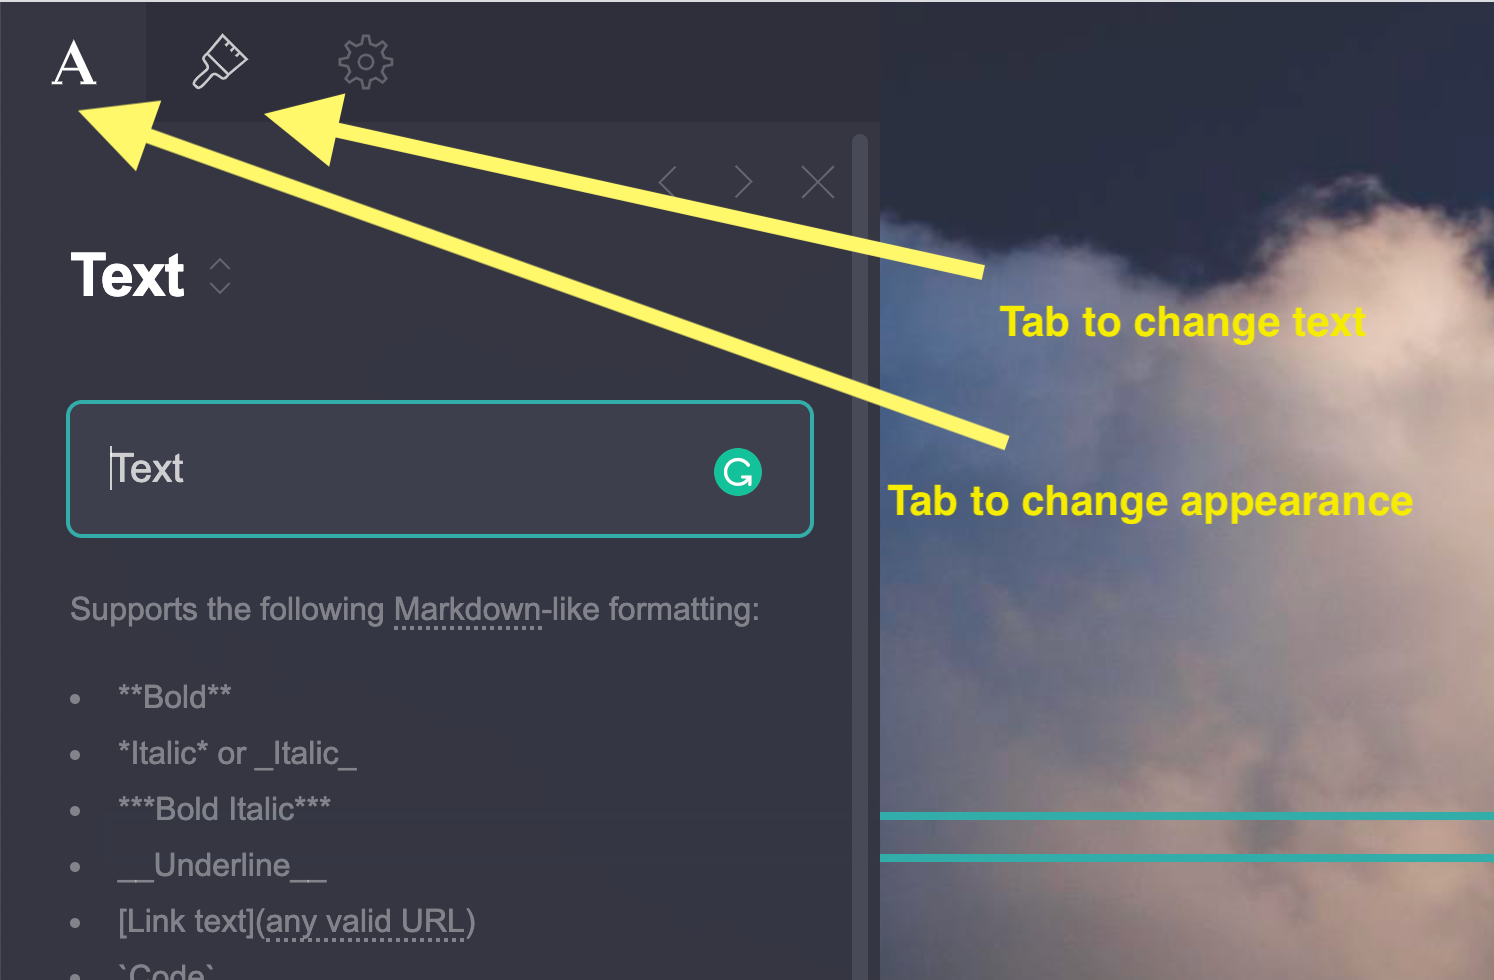 Change text and appearance